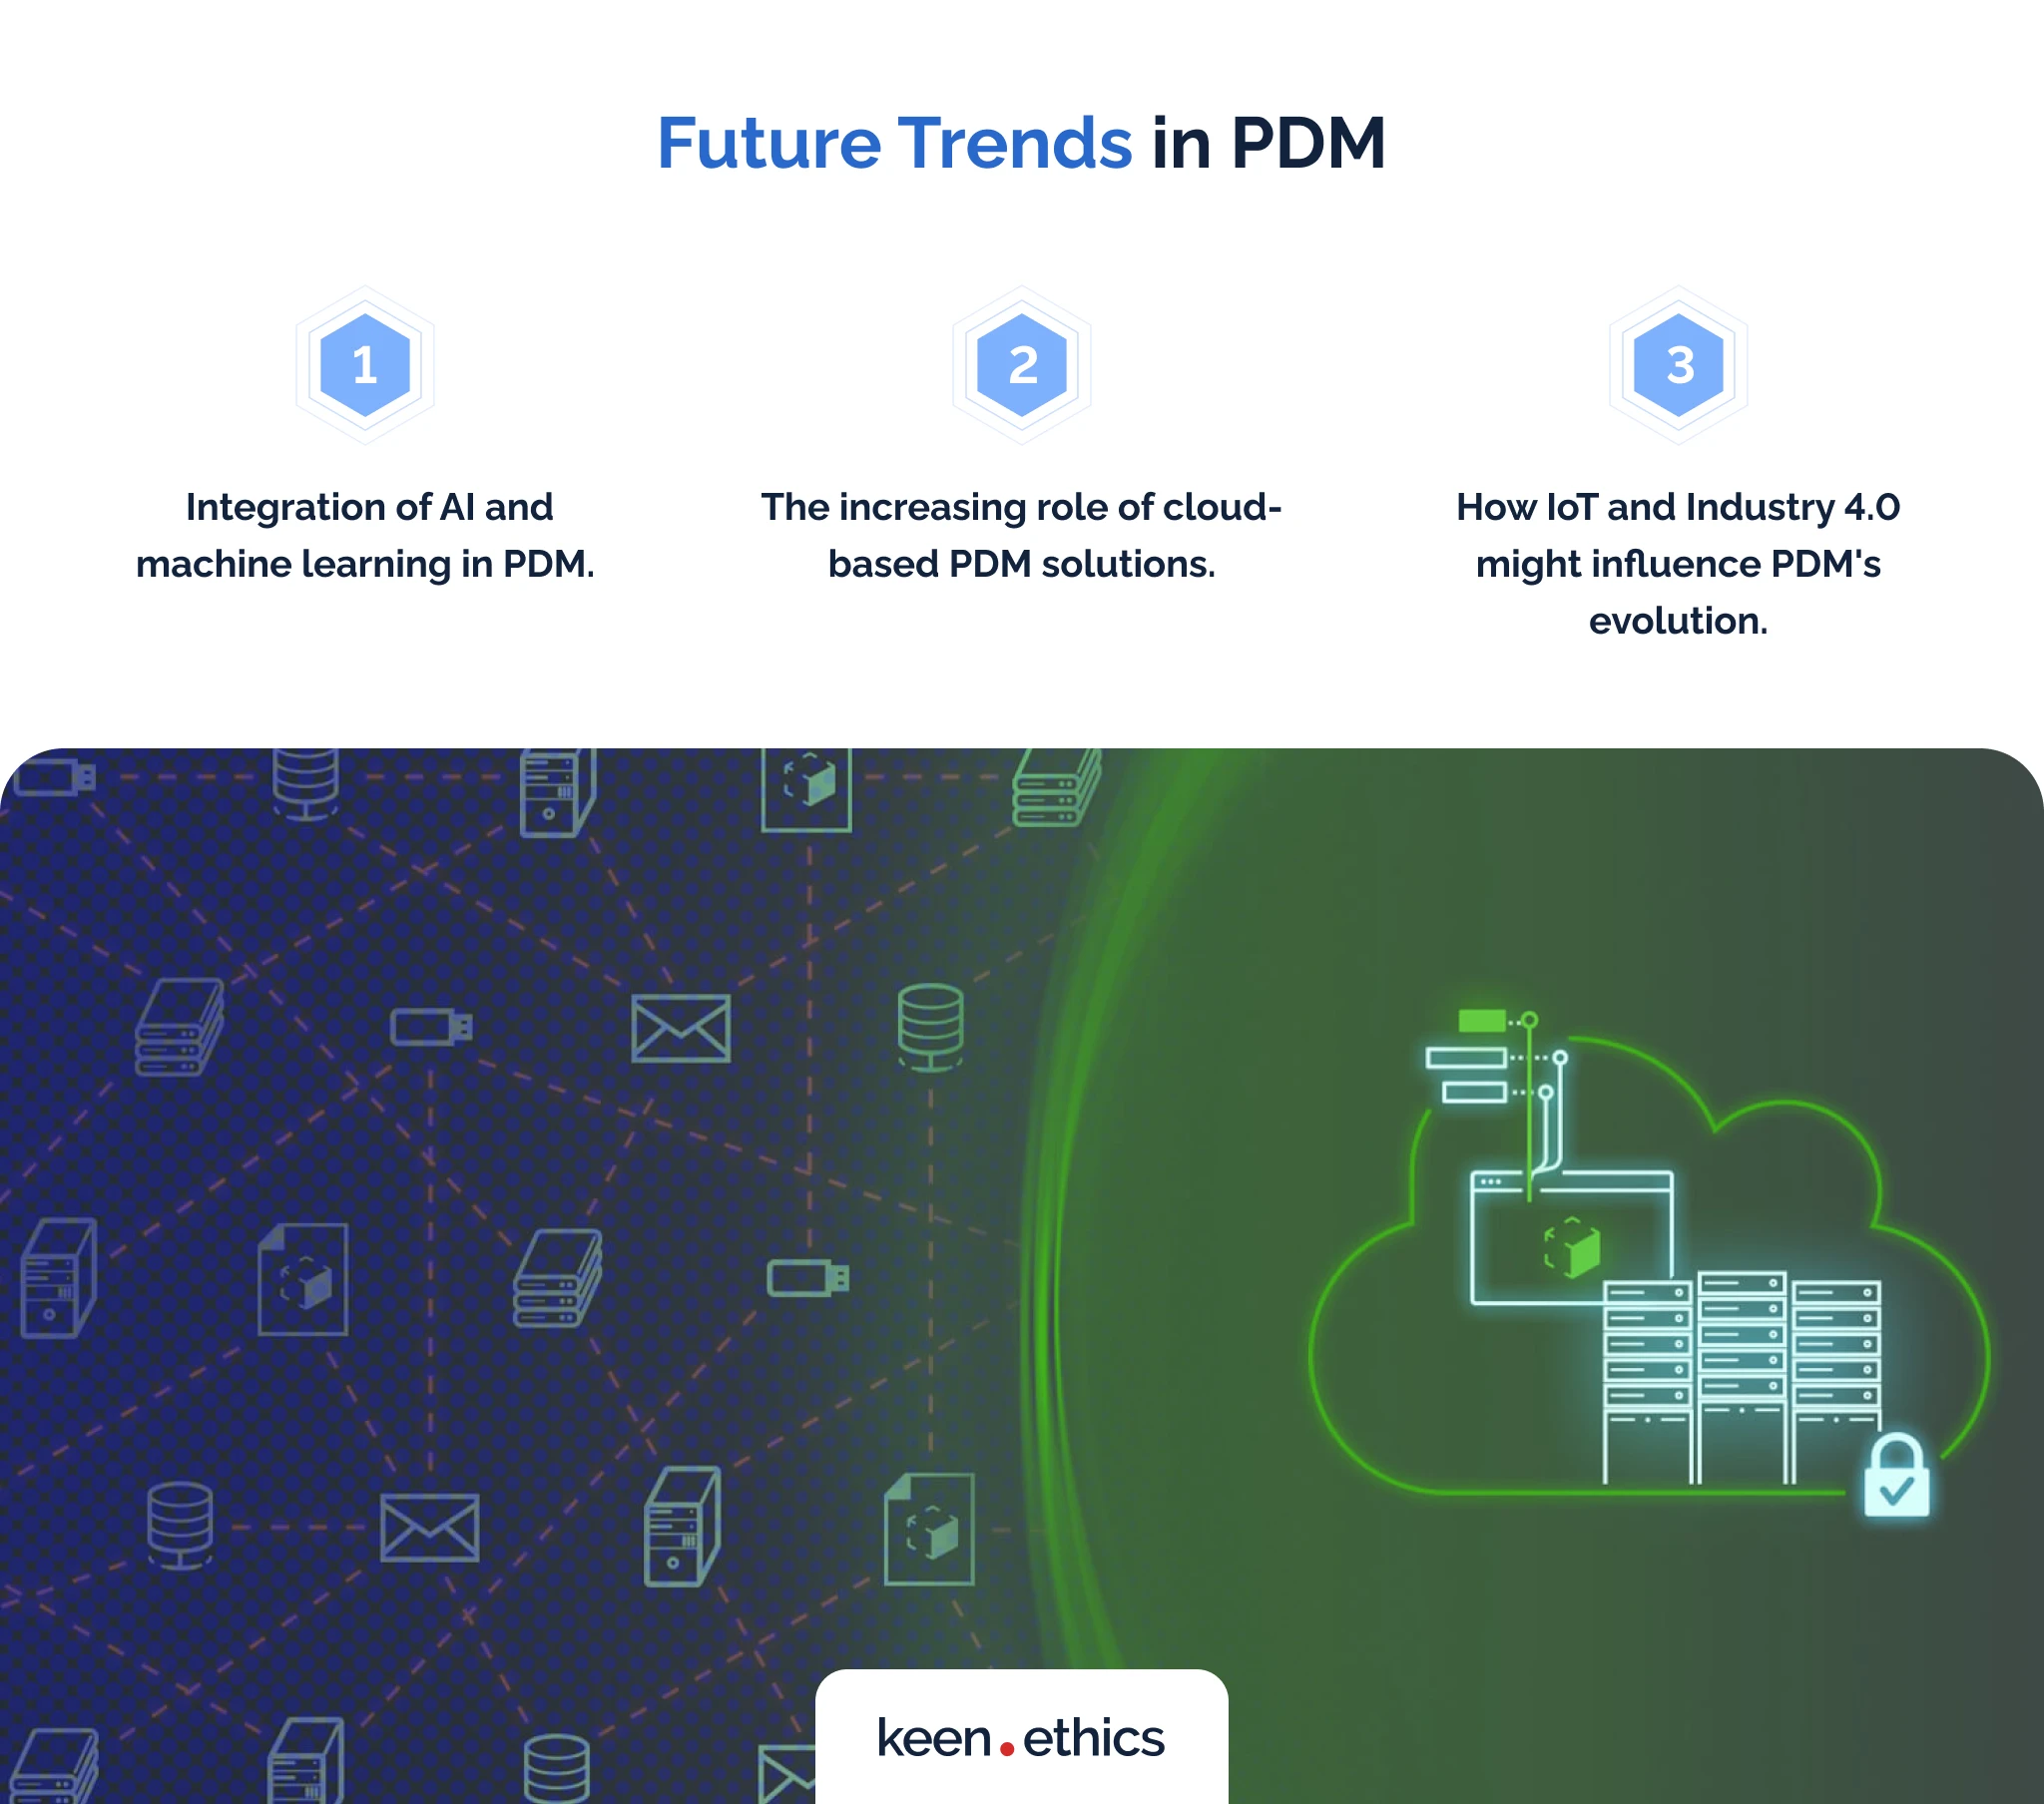 Future trends in PDM